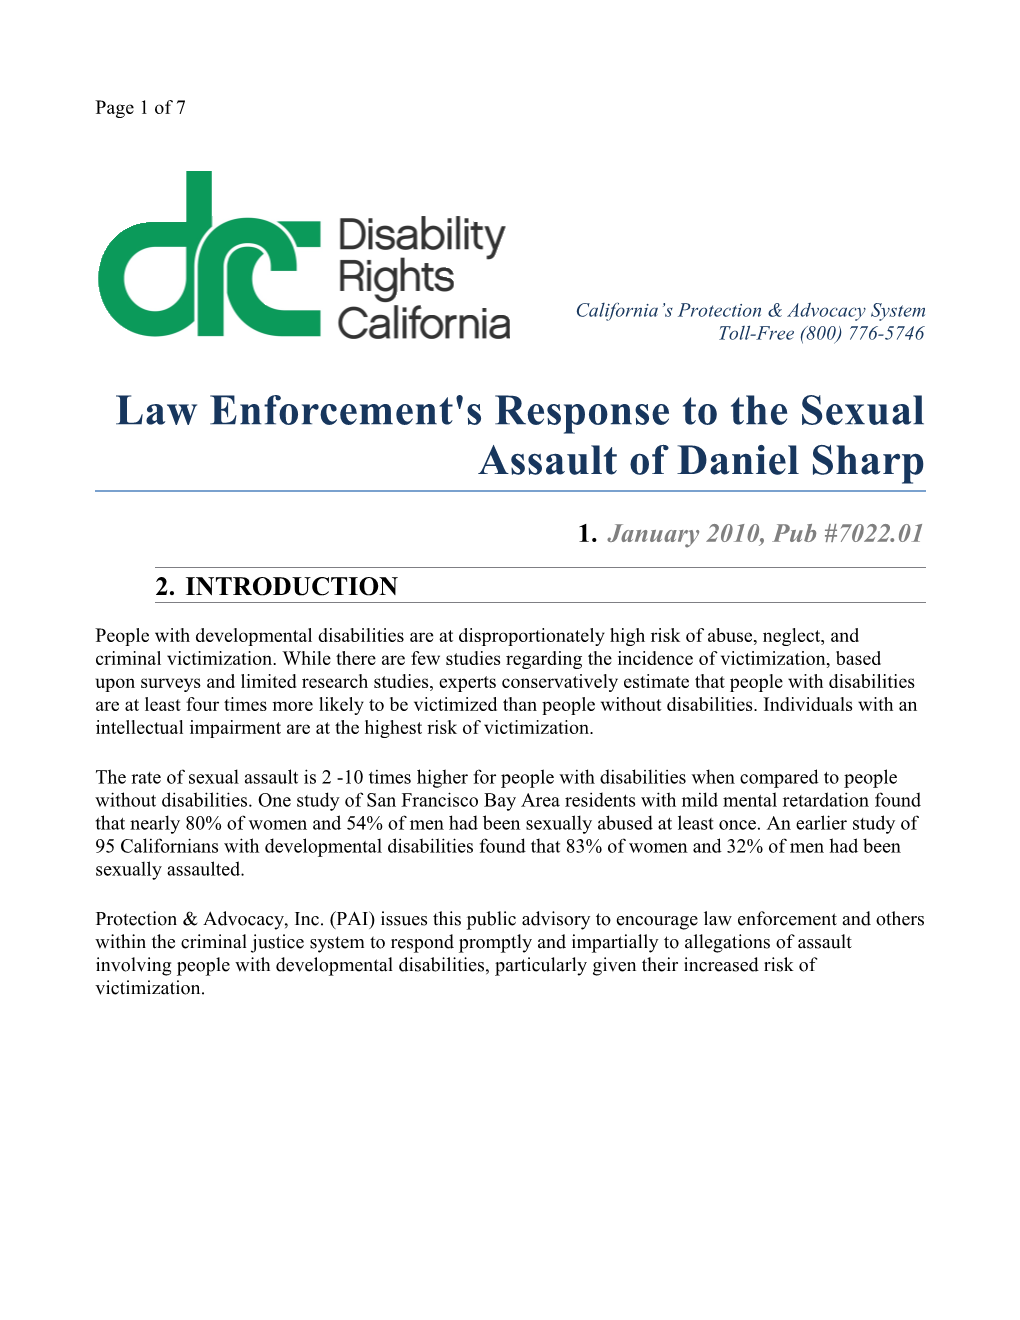 Law Enforcement's Response to the Sexual Assault of Daniel Sharp